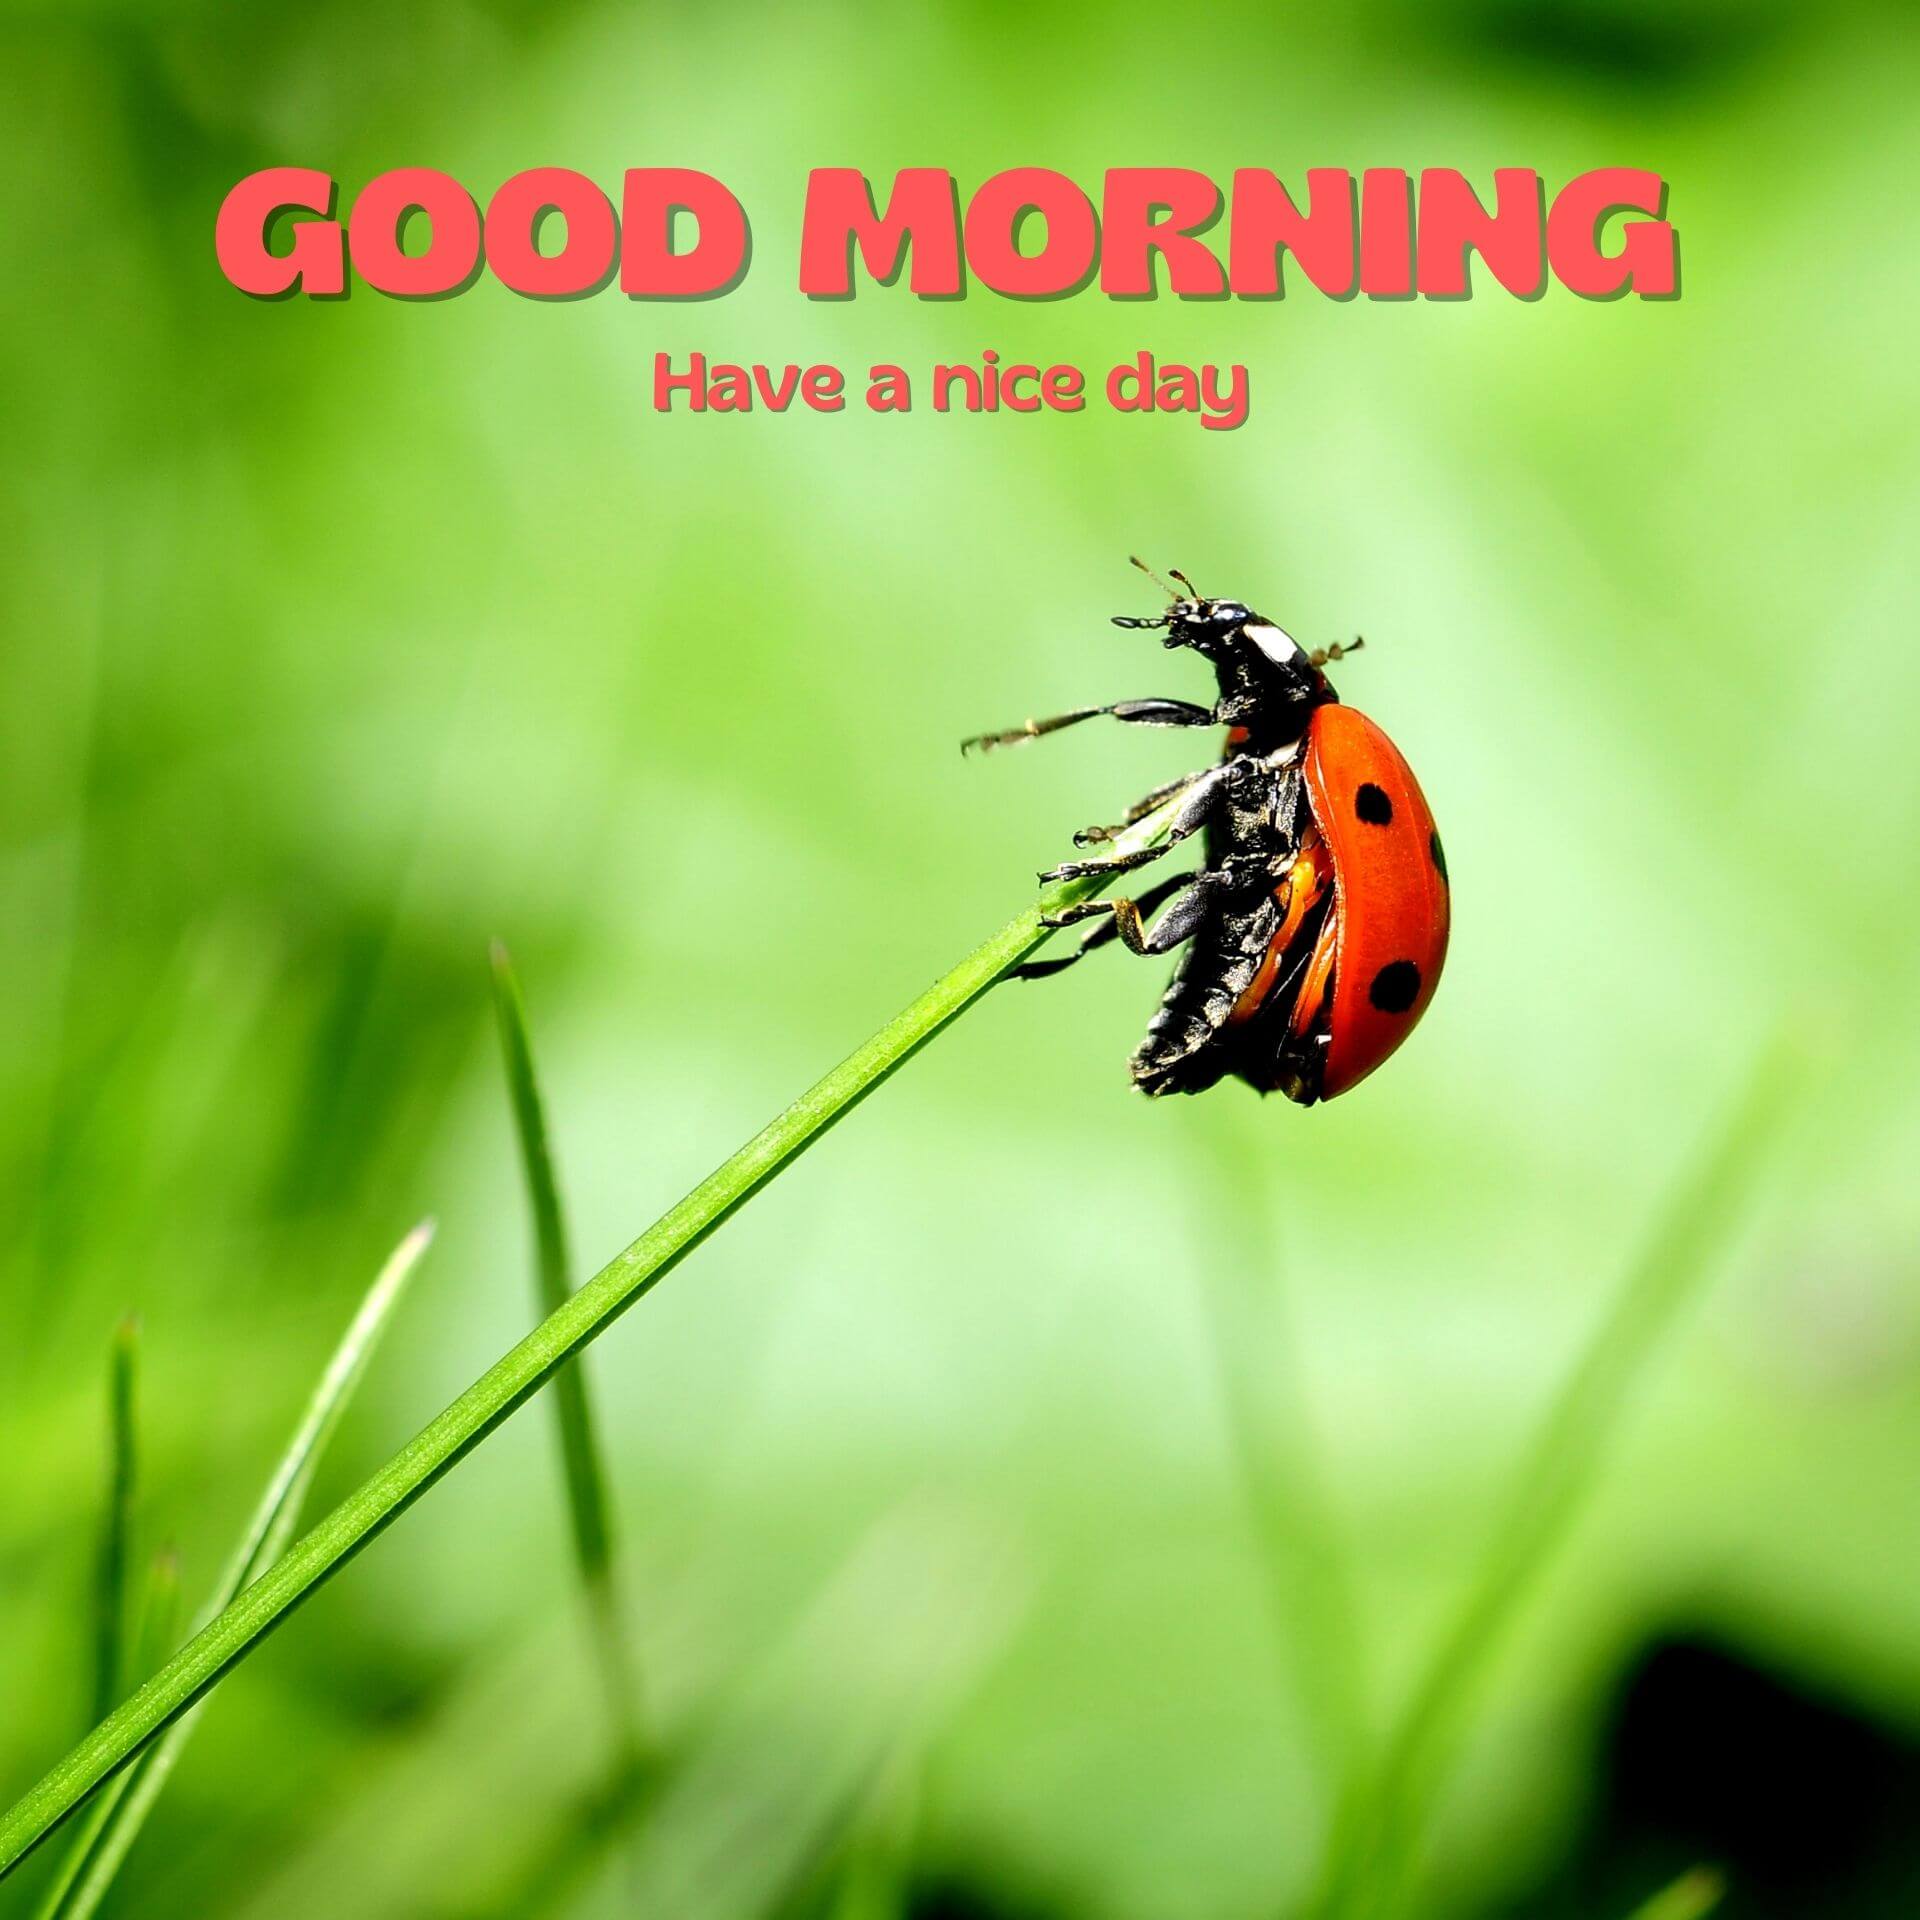 Butterfly Good Morning 1080p Images Wallpaper Download